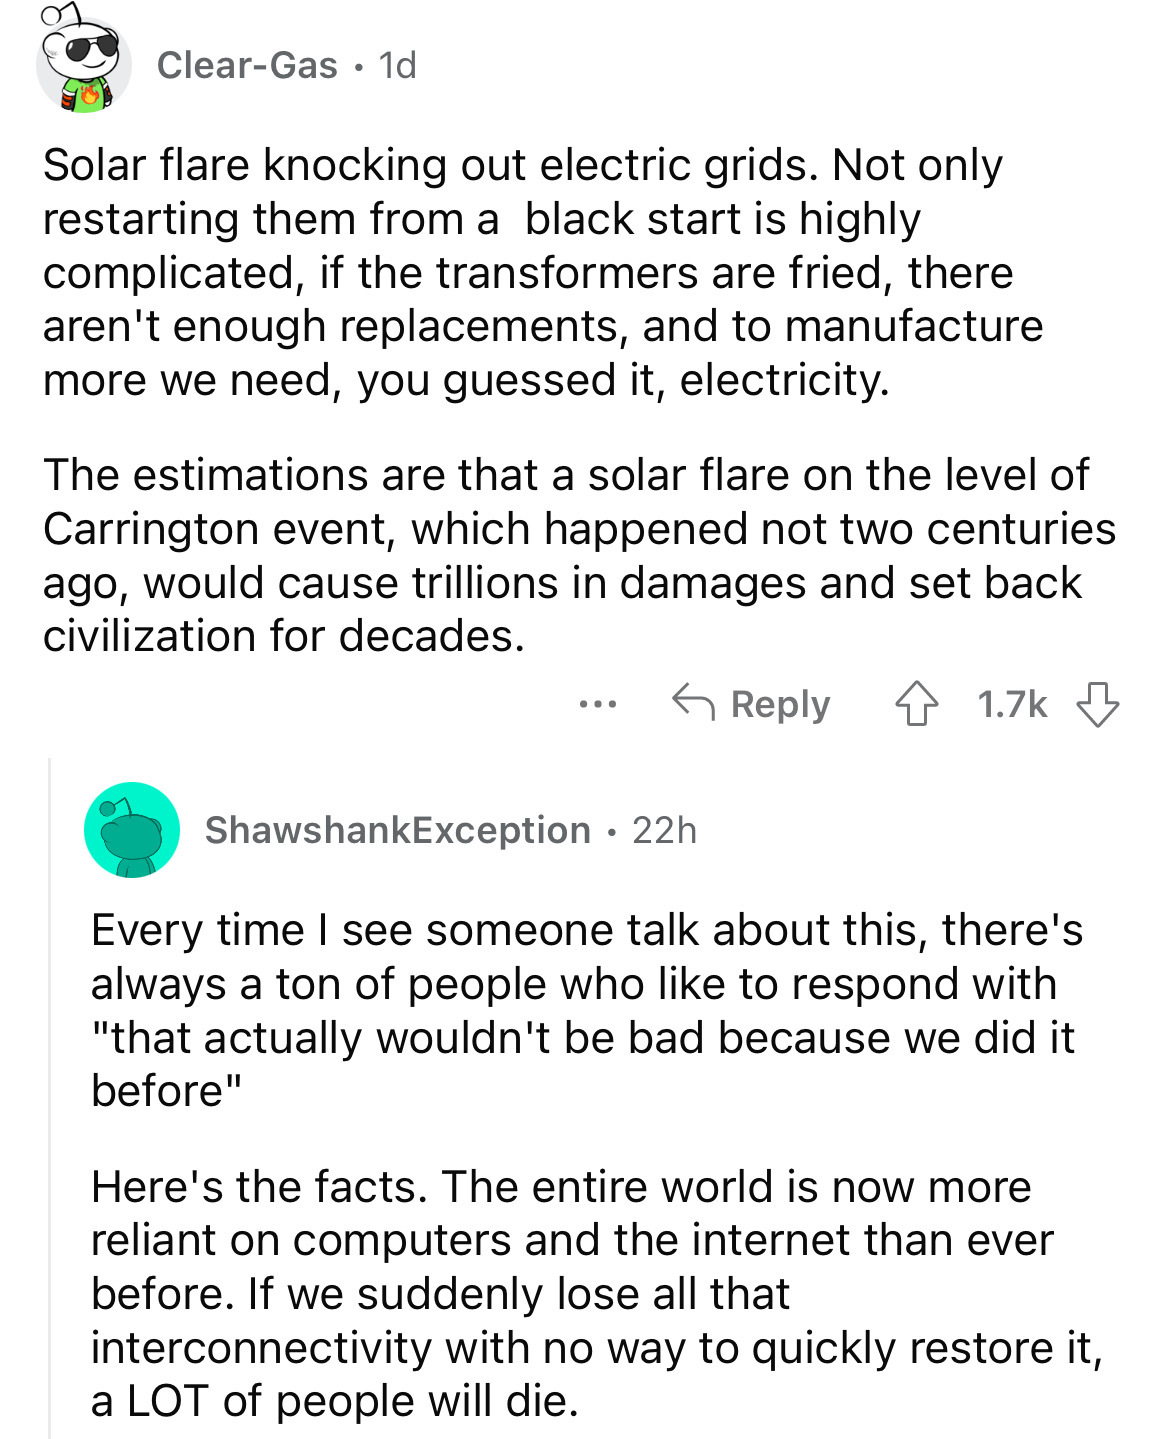 document - ClearGas 1d Solar flare knocking out electric grids. Not only restarting them from a black start is highly complicated, if the transformers are fried, there aren't enough replacements, and to manufacture more we need, you guessed it, electricit